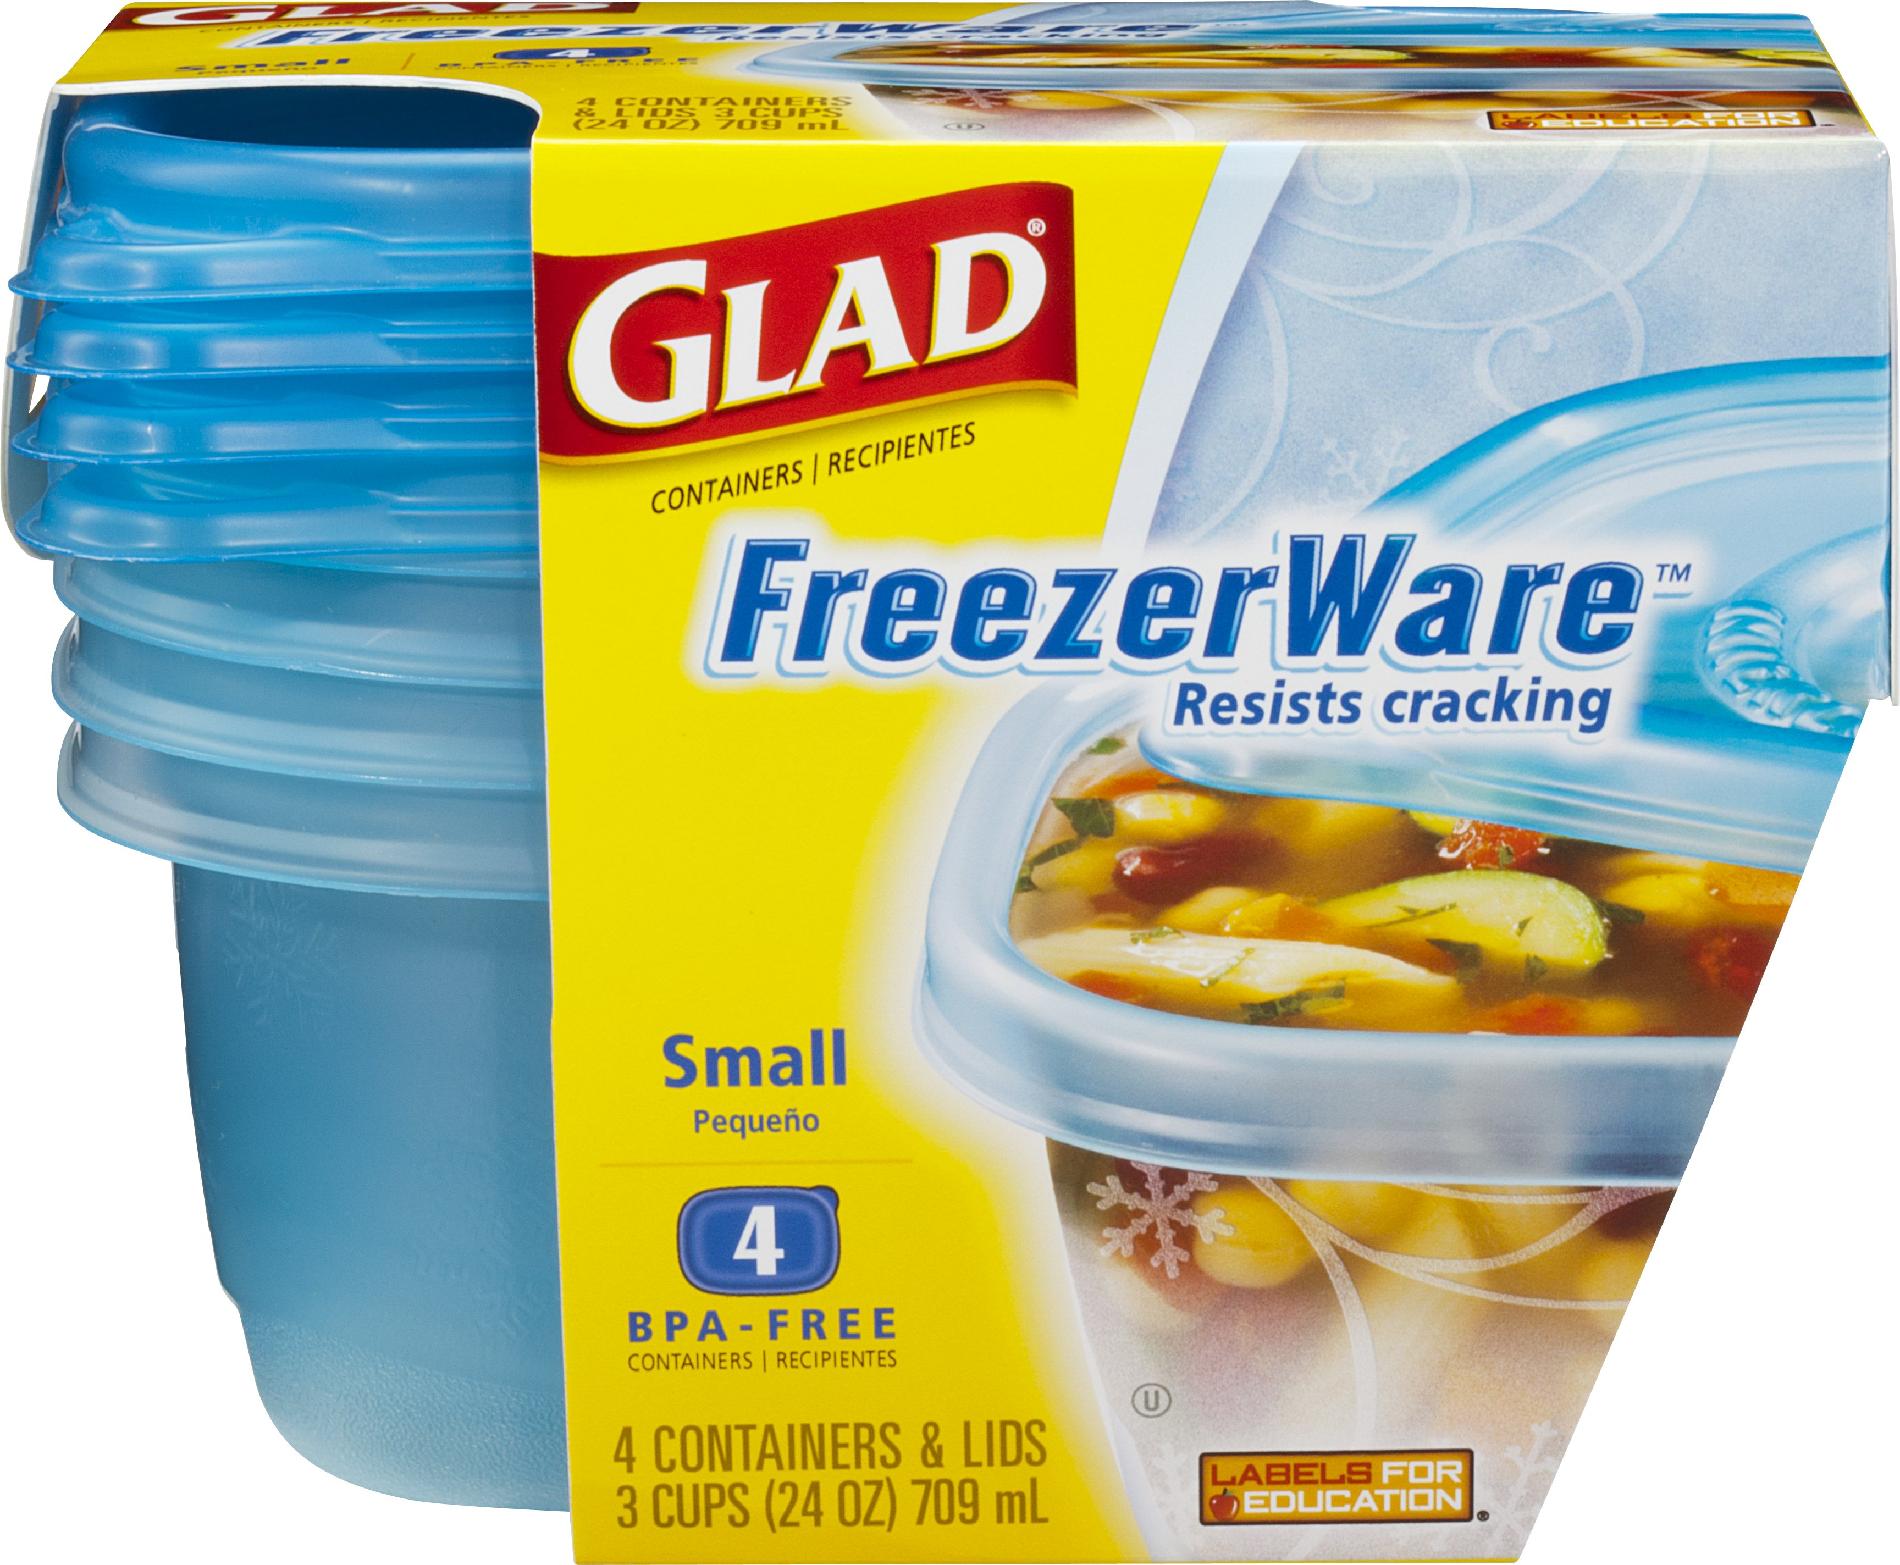 Glad Freezerware Containers And Lids Small